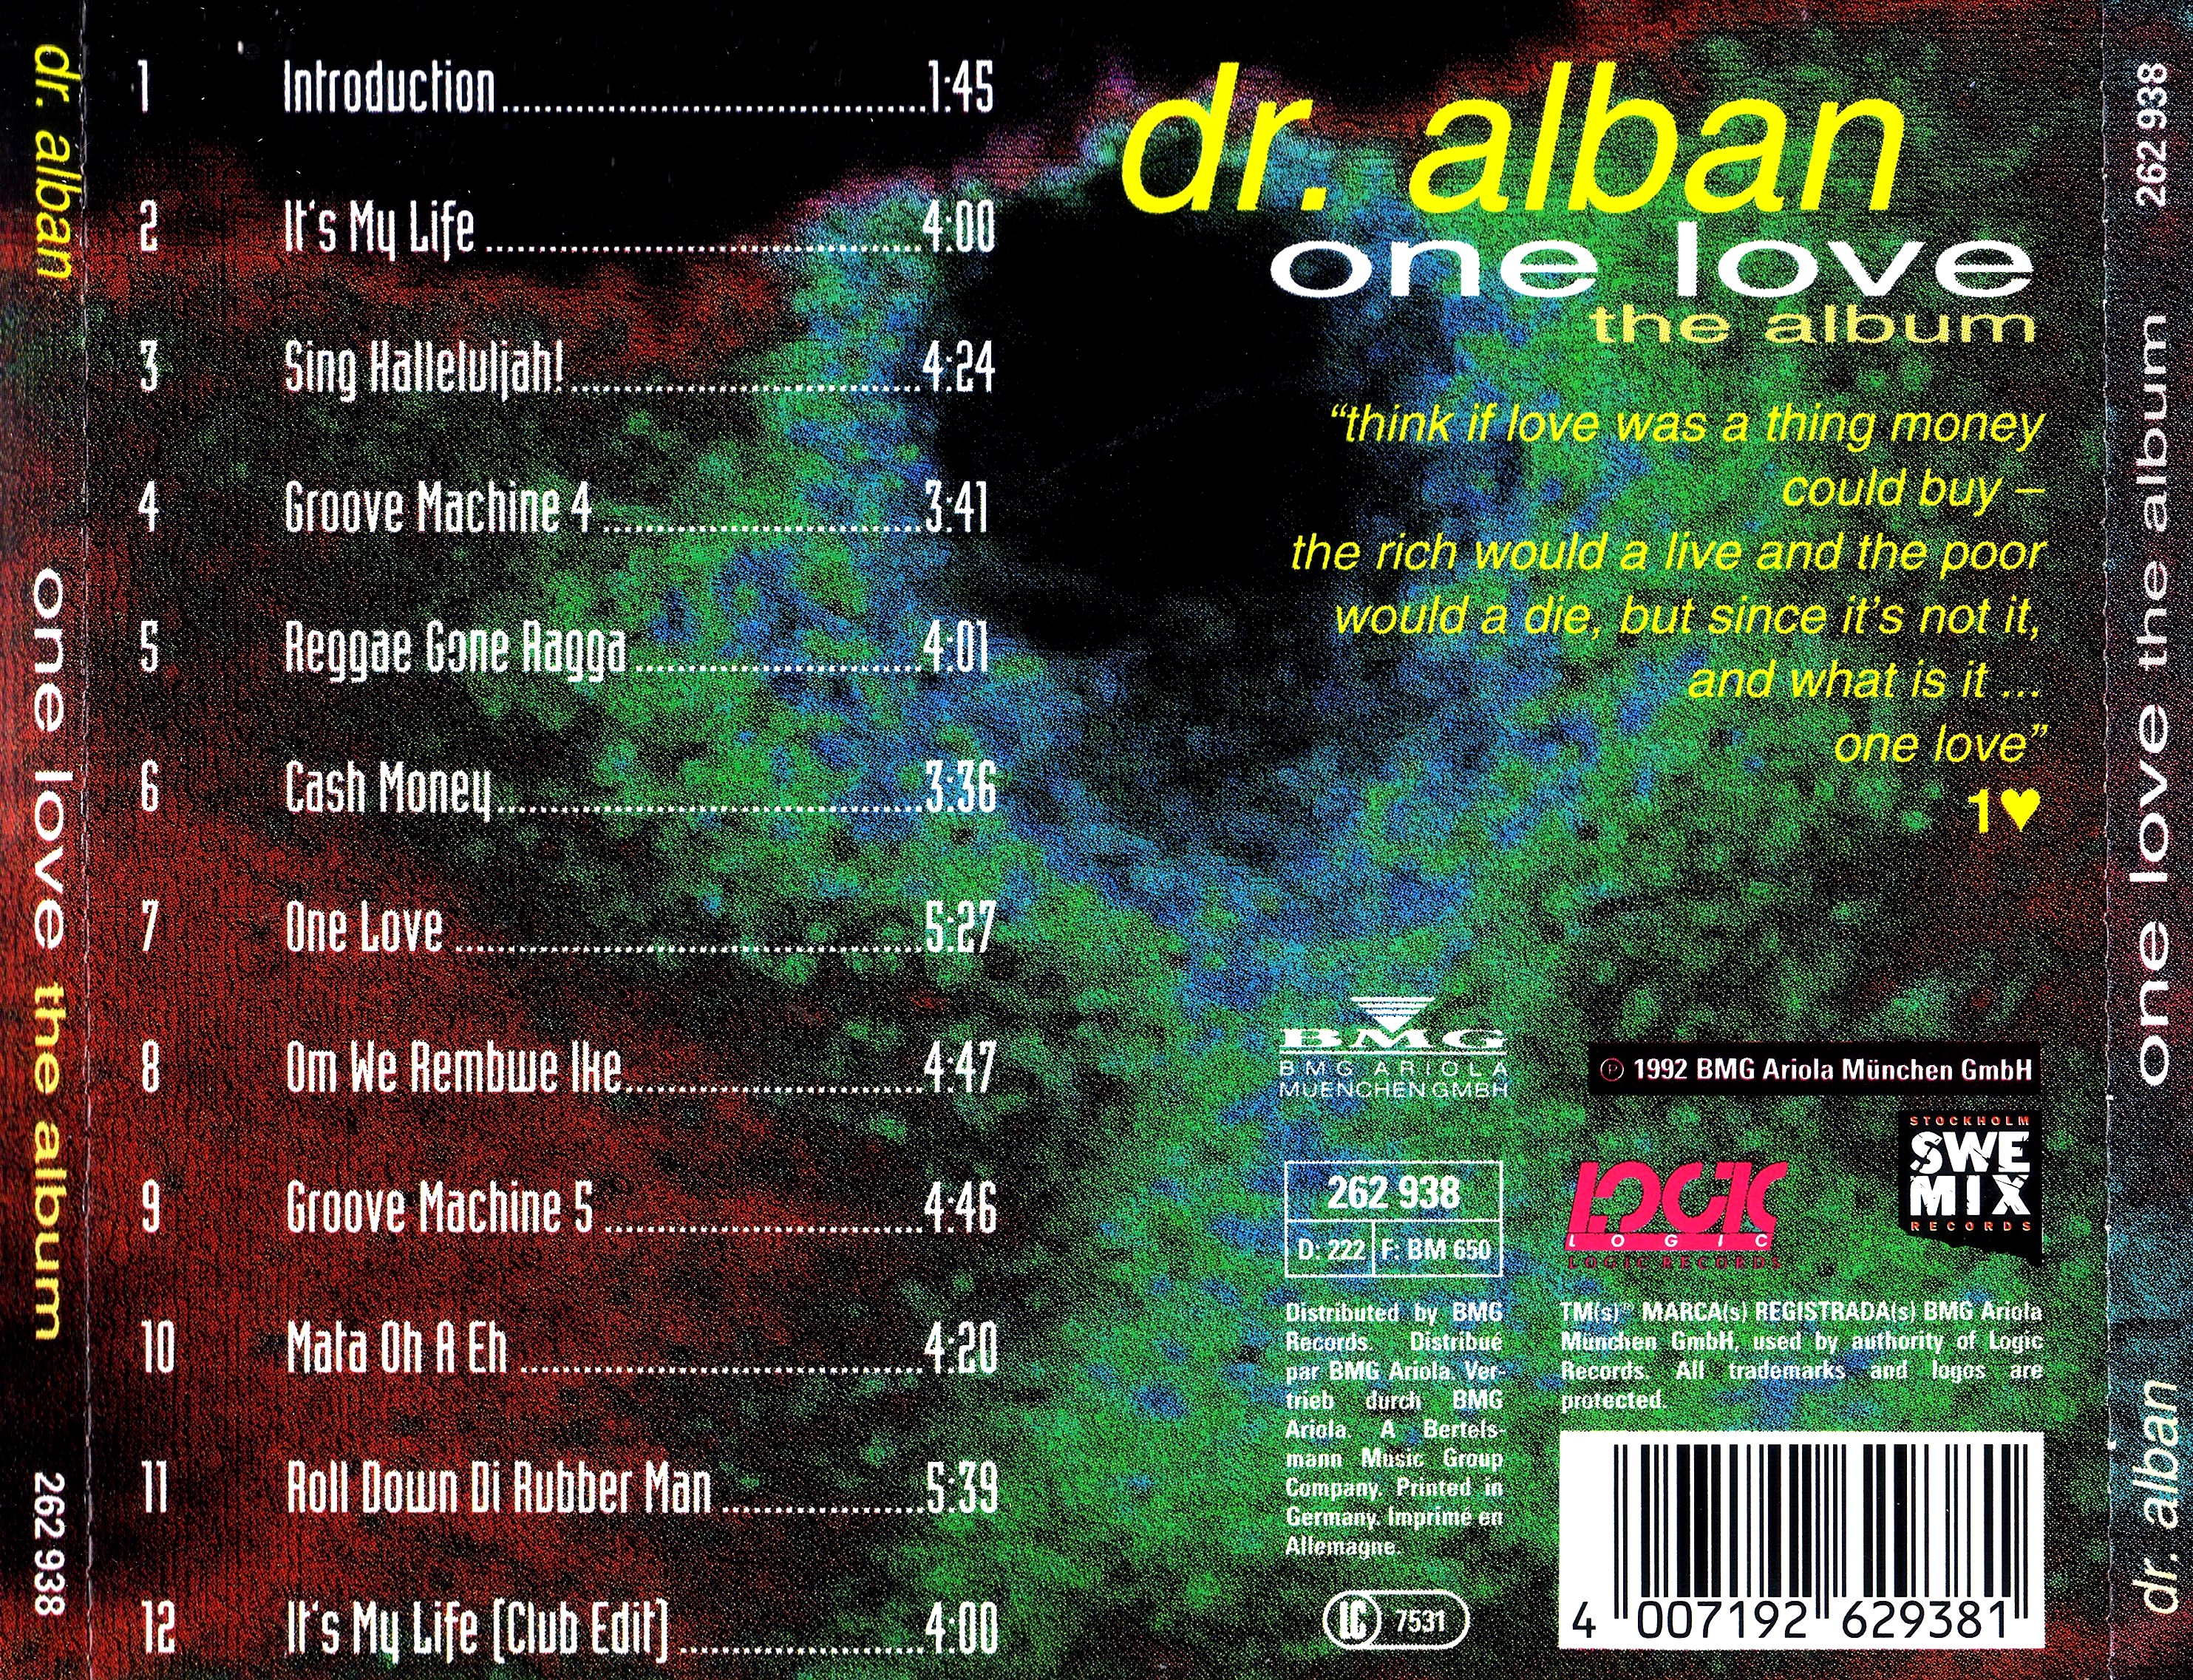 Alban hard. Dr. Alban one Love the album 1992. One Love доктор албан. Доктор албан 1992. Dr. Alban one Love (the album).